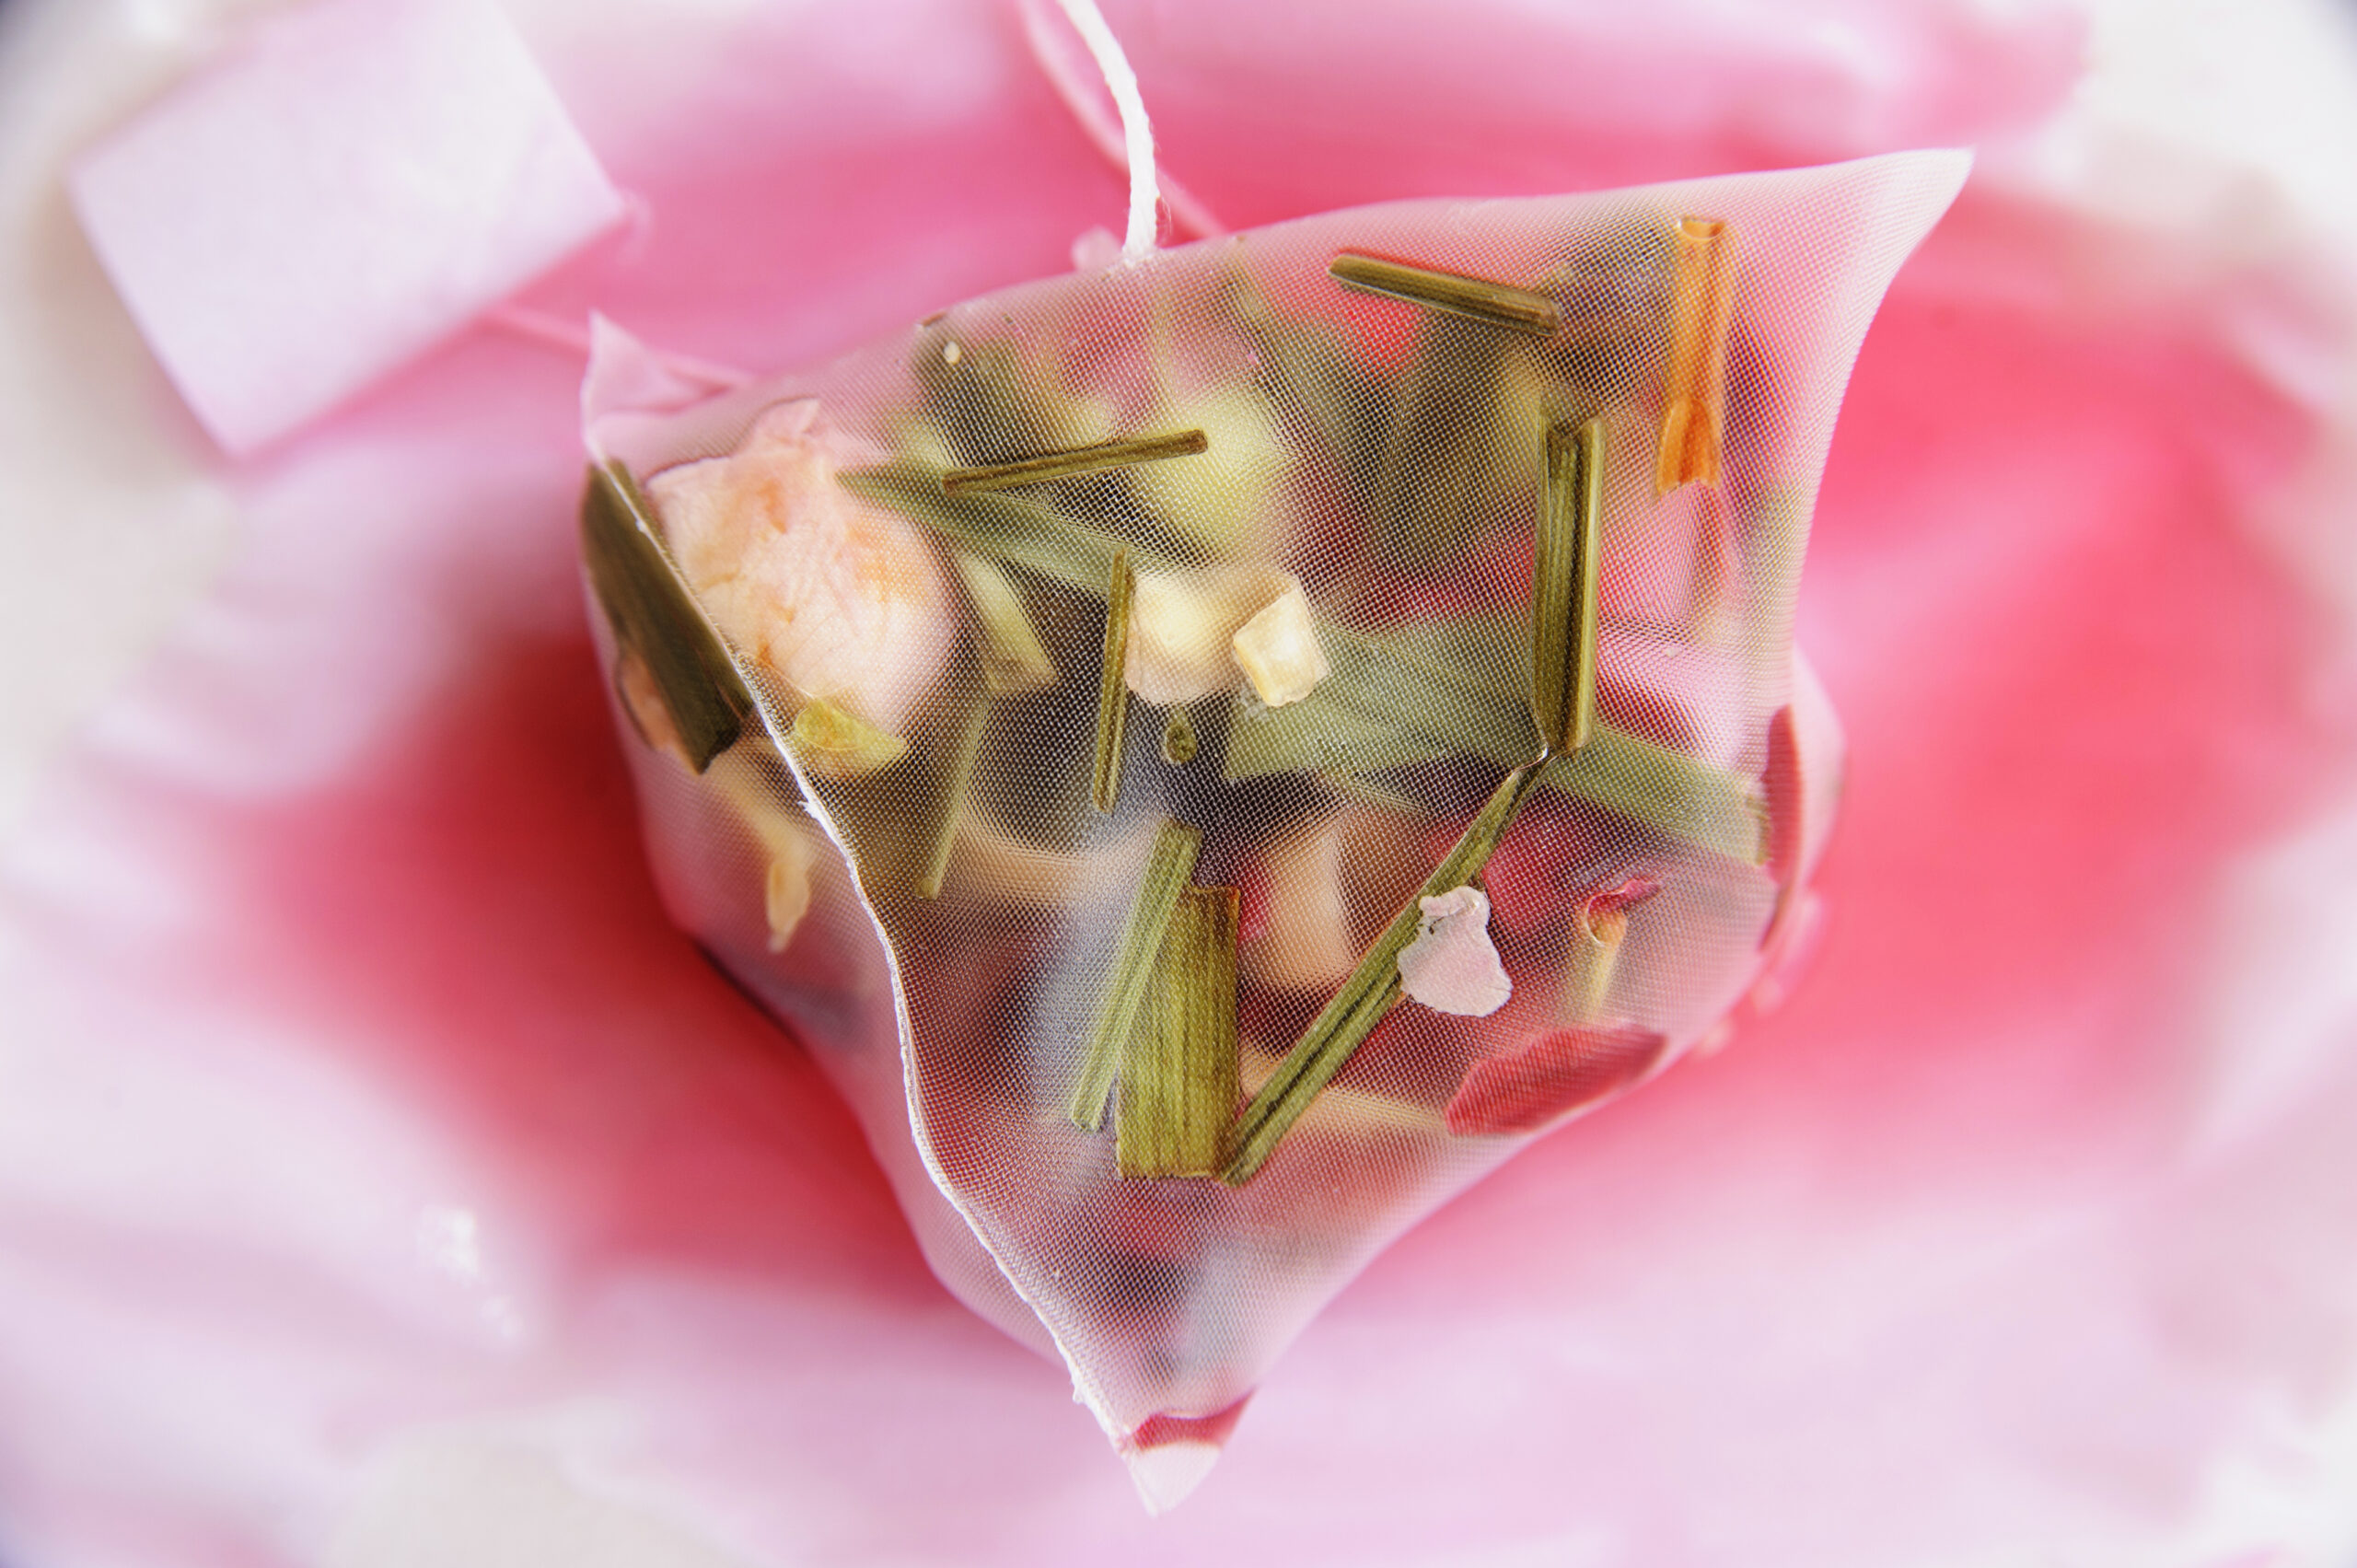 Rose Garden teabag with flower buds, petals and leaves visible through the bag, wet and leaking, with visible teabag string and tag